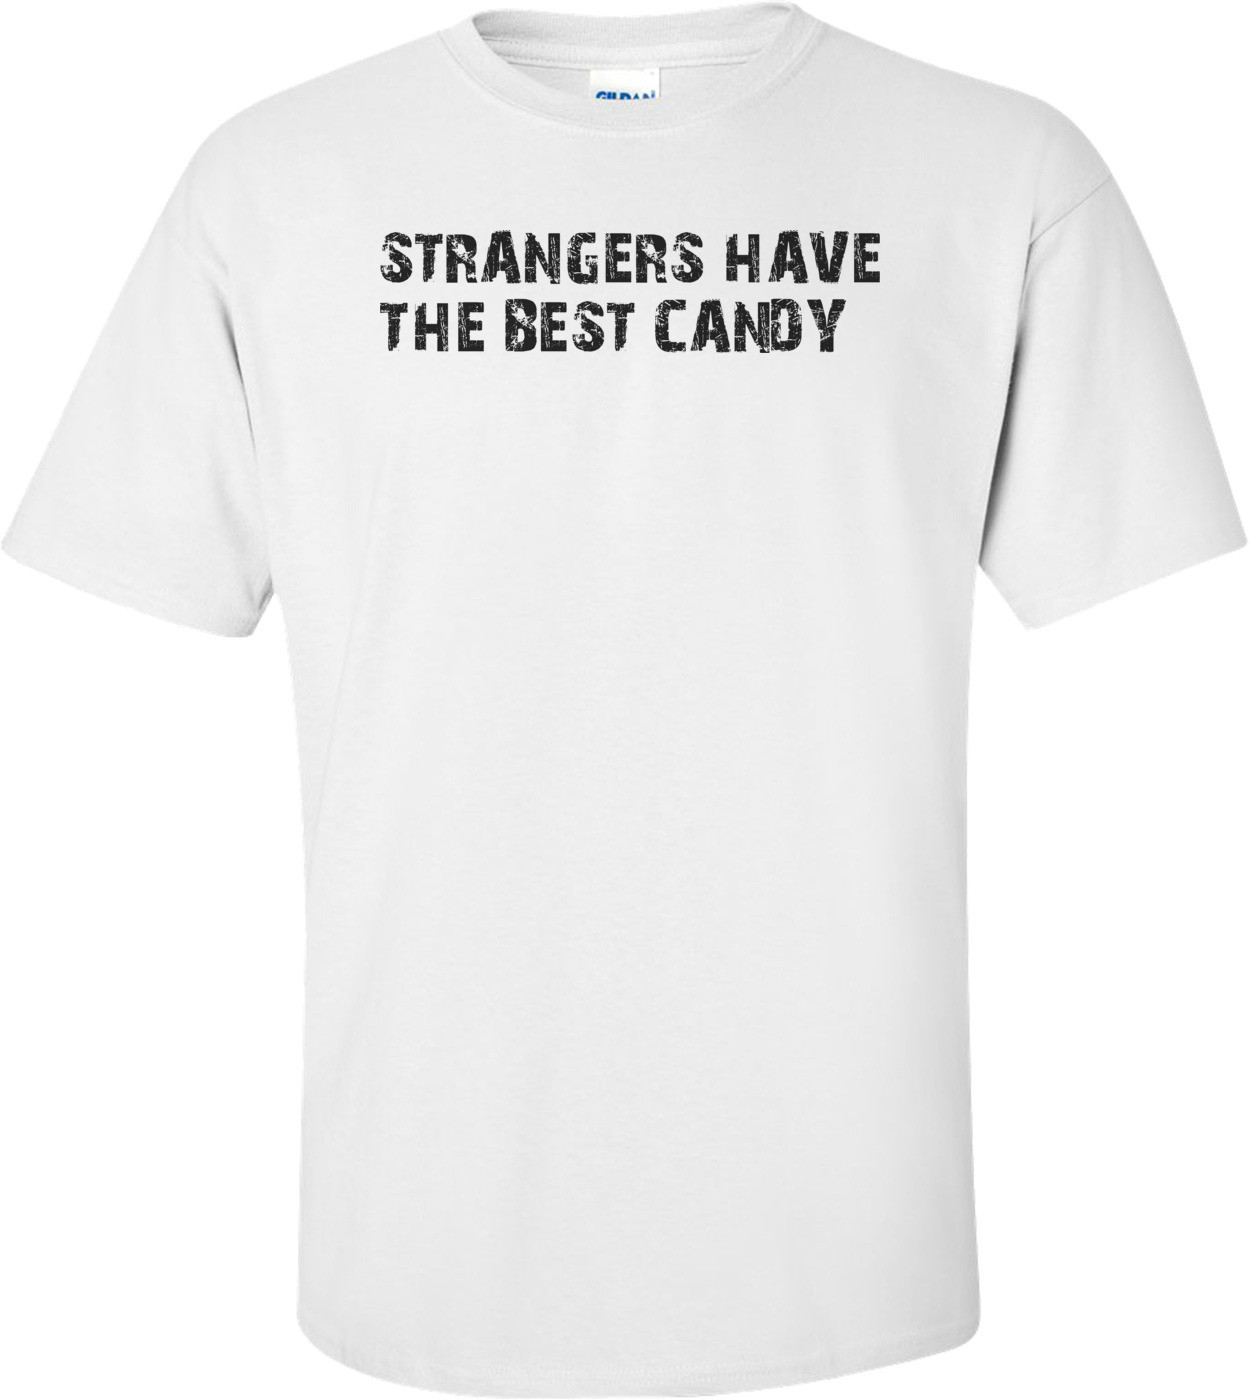   STRANGERS HAVE THE BEST CANDY Shirt